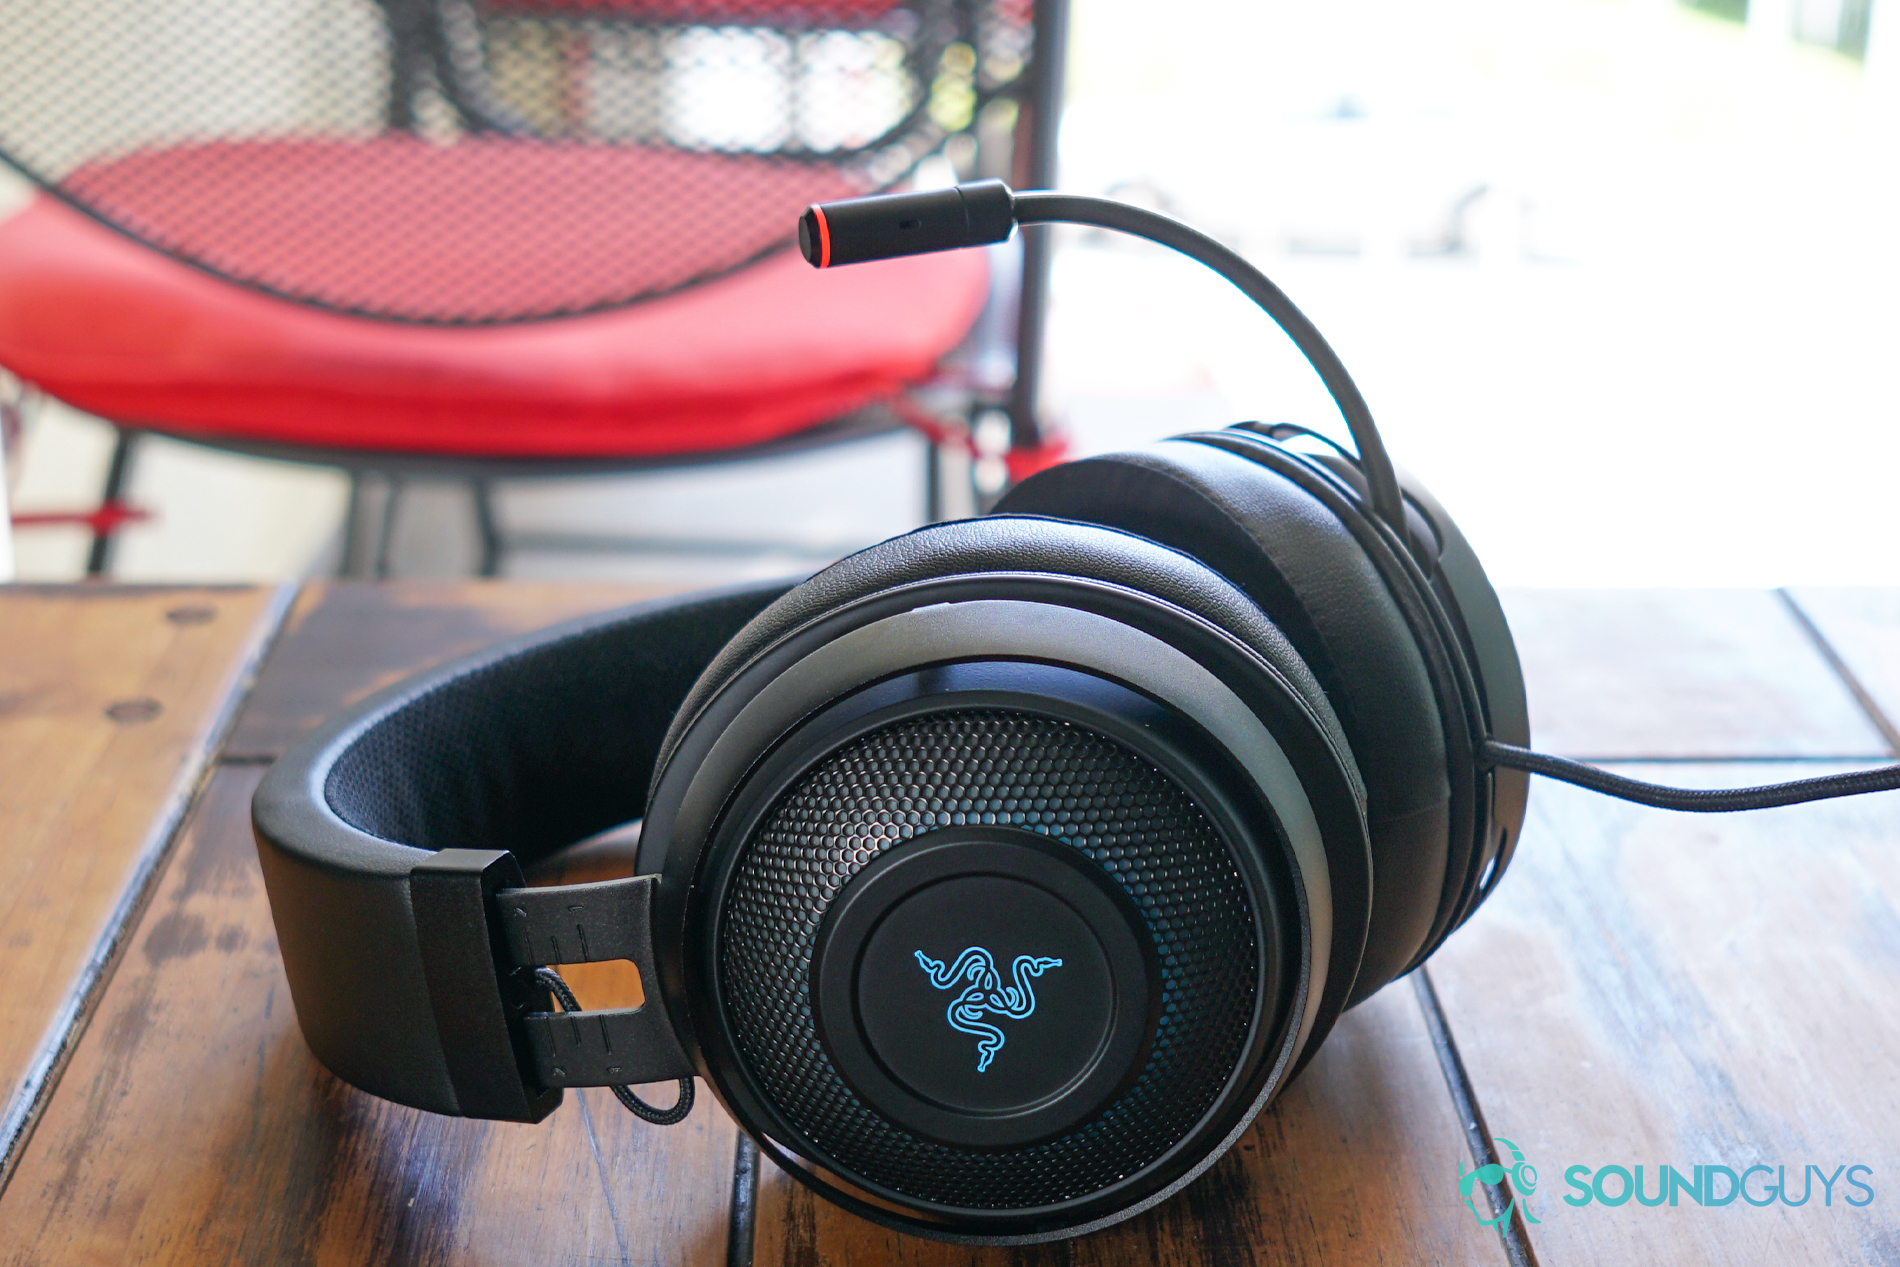 The Razer Kraken Ultimate sits on a wooden table in front of a balcony with tables and chairs.